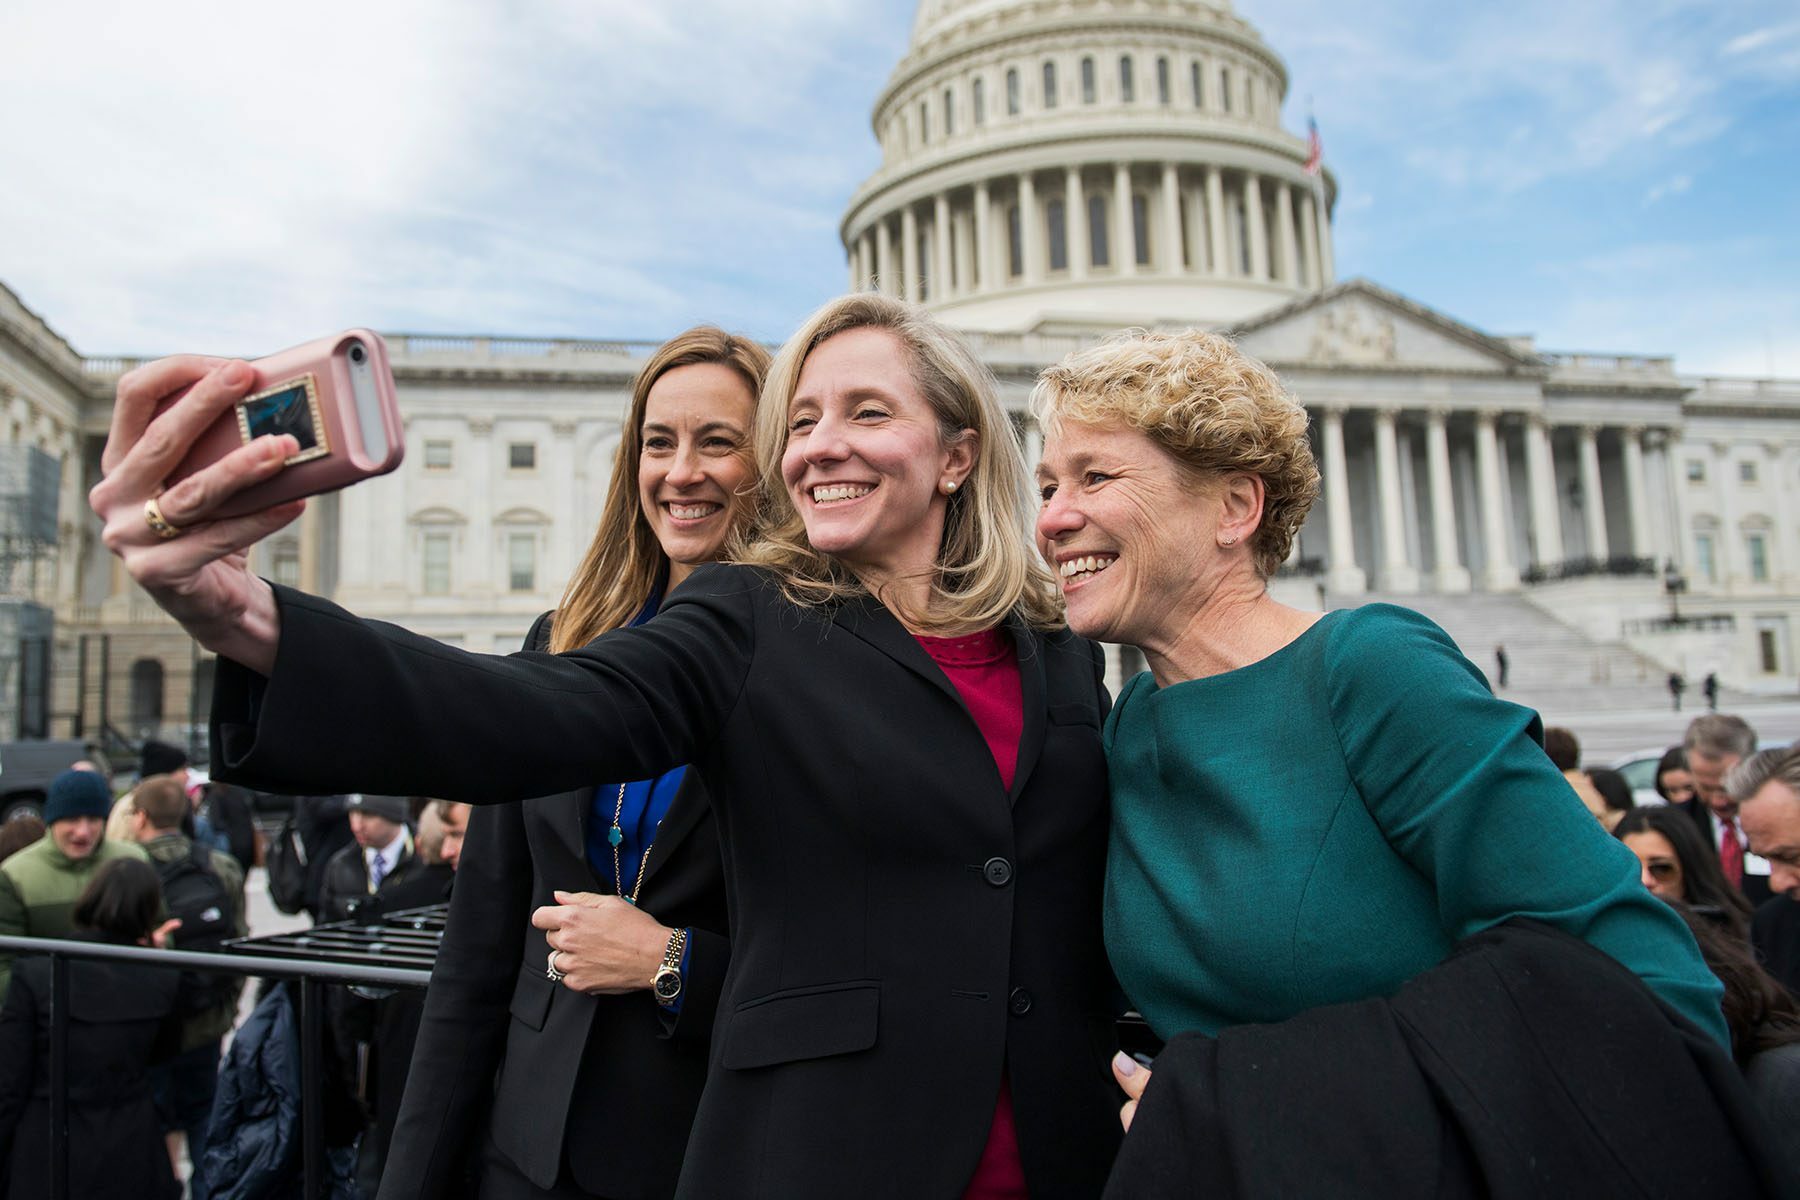 Mikie Sherrill, Abigail Spanberger and Chrissy Houlahan take a selfie in front of the U.S. Capitol.